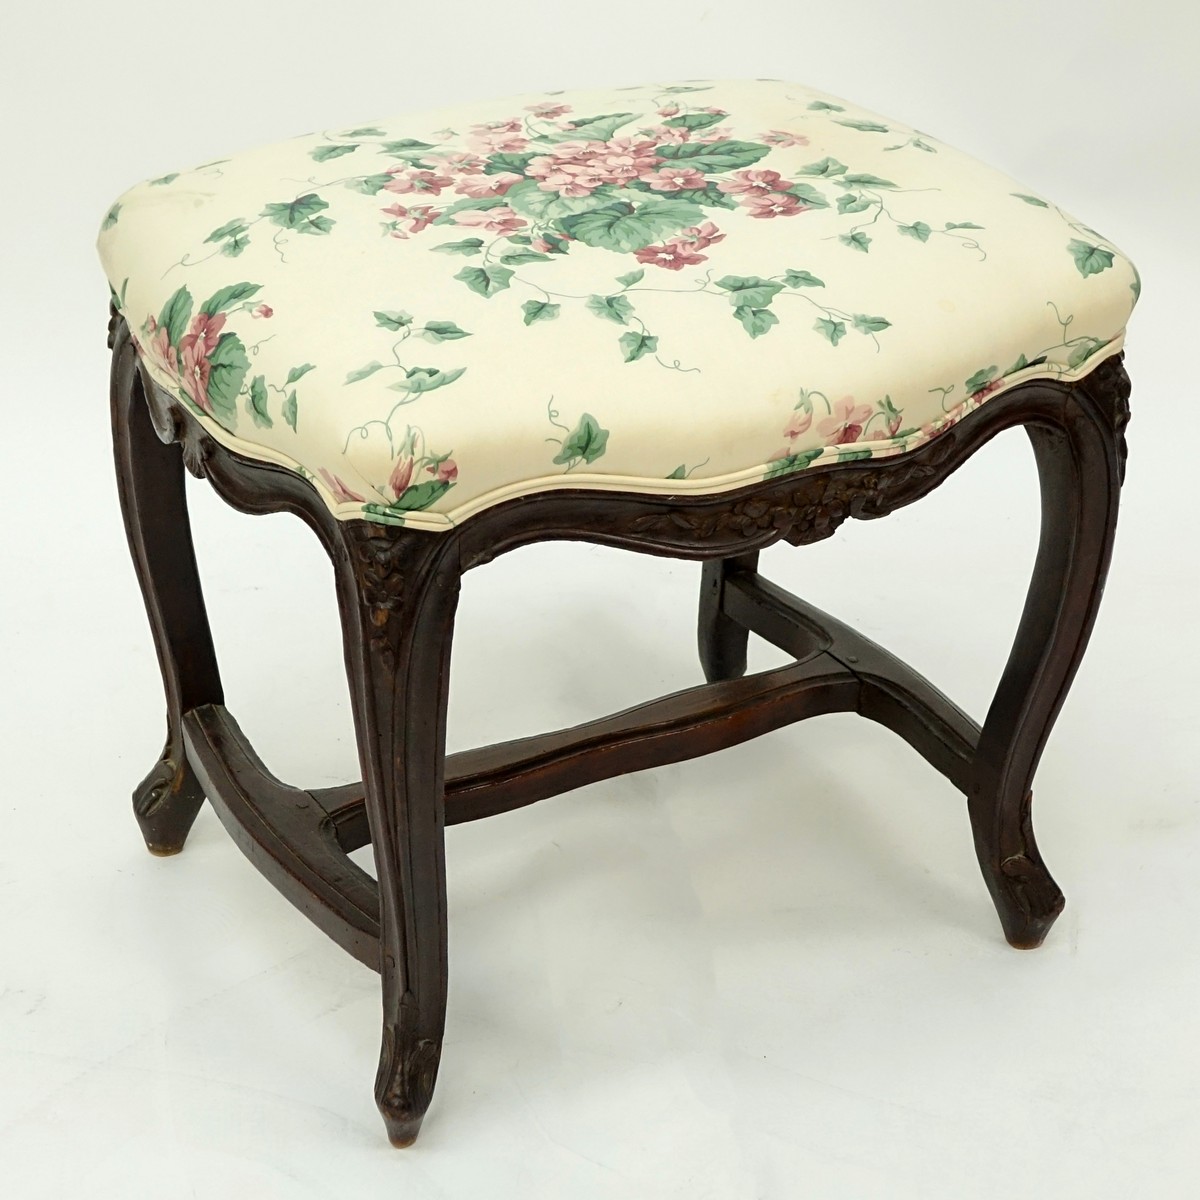 19th Century Louis XV French Carved Wood and Upholstered Tabouret Stool. Scratches to wood.